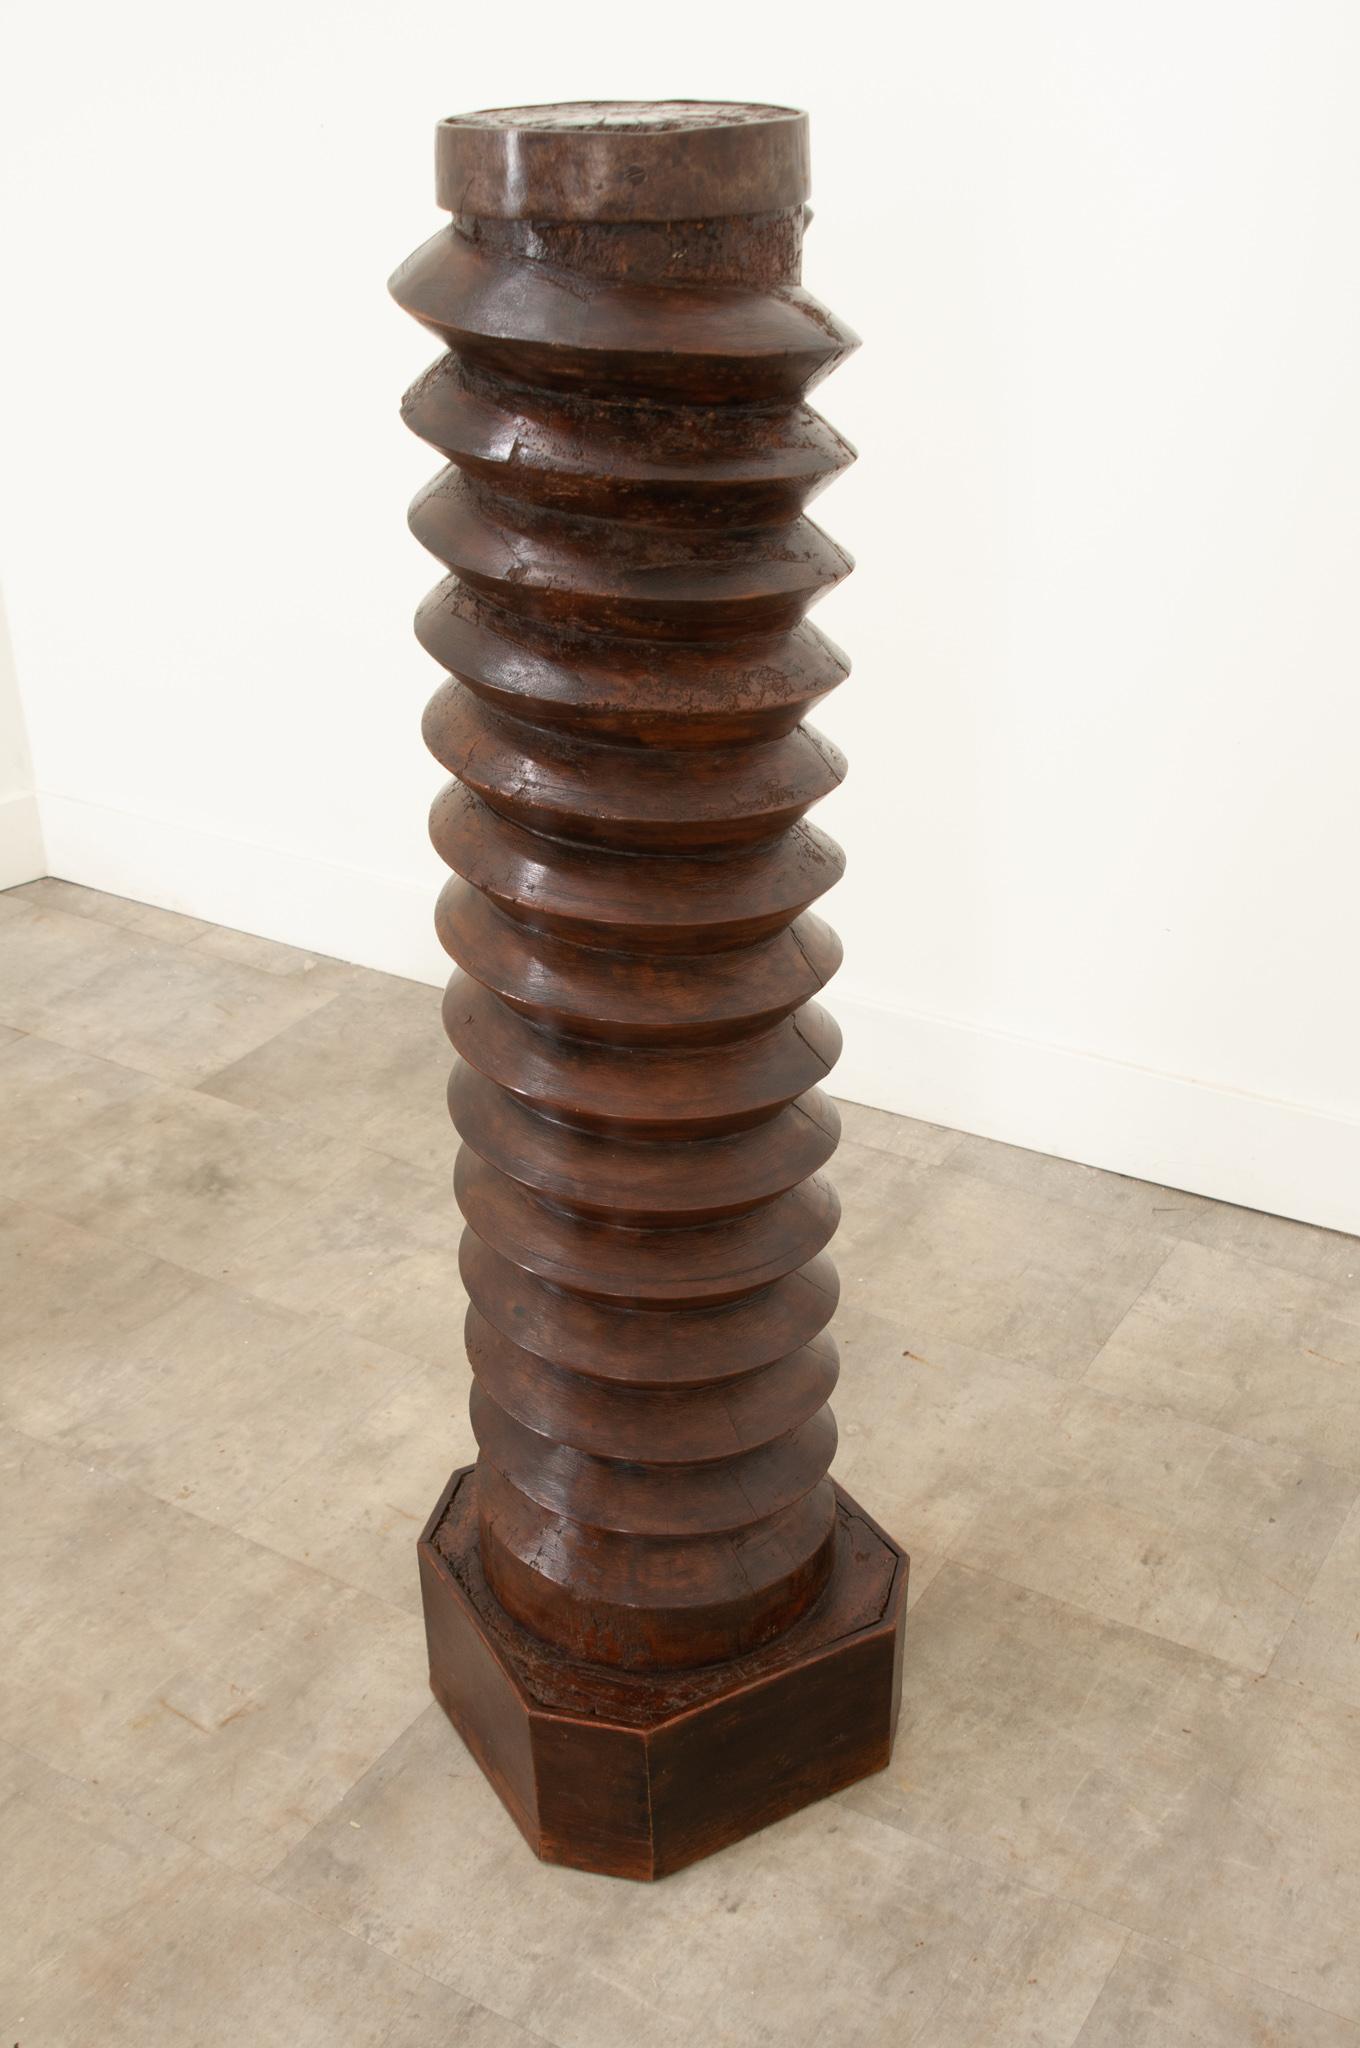 This wonderfully aged 18th century grape press screw – from a winery in France – has been converted into a pedestal with a circular top and octagonal base added later. The shaft would have driven a large stone wheel downward, crushing and squeezing